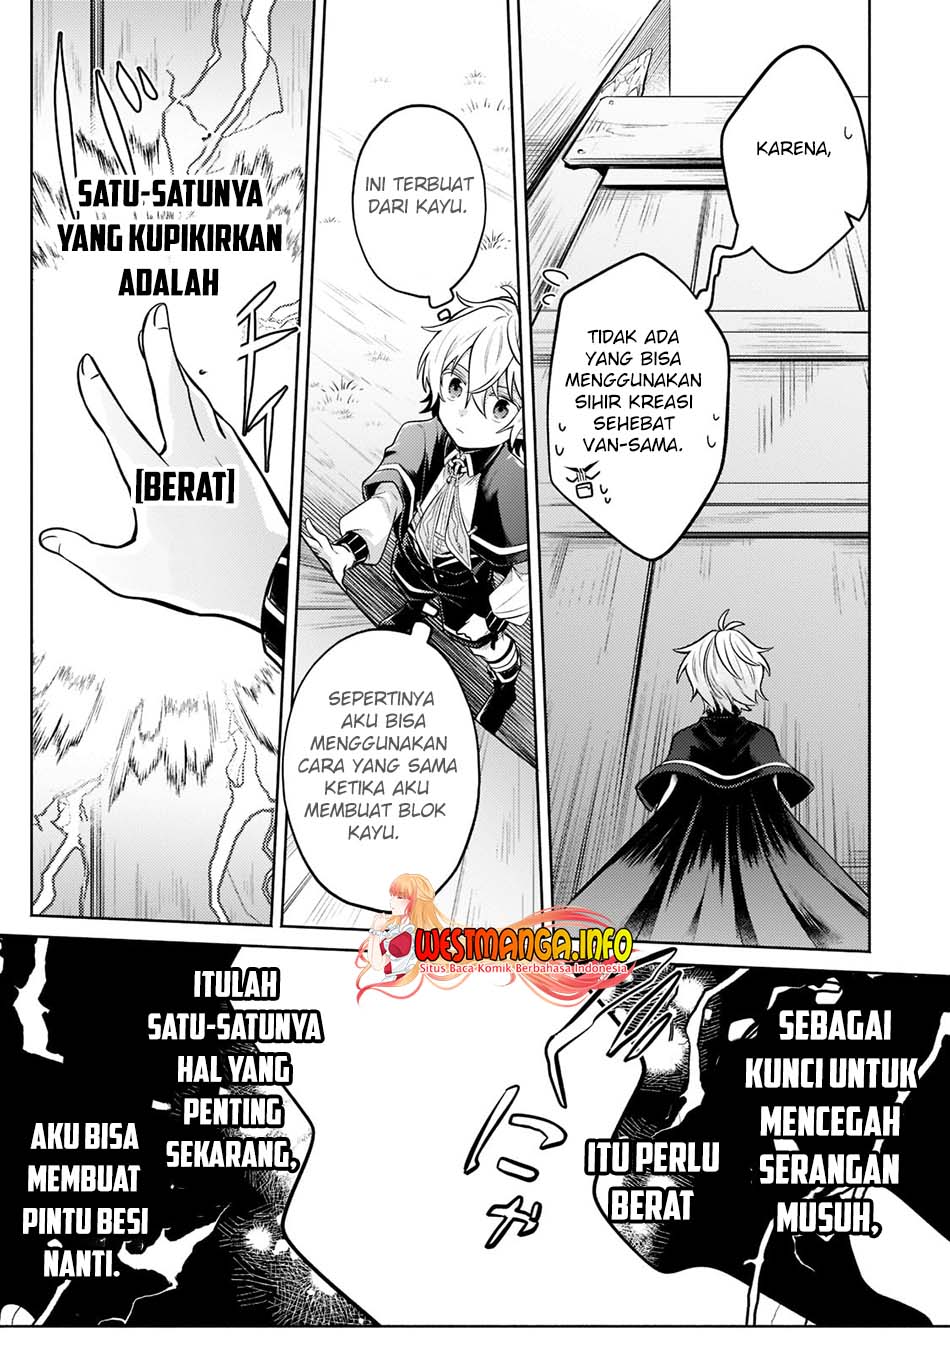 Fun Territory Defense Of The Easy-Going Lord ~The Nameless Village Is Made Into The Strongest Fortified City By Production Magic~ Chapter 09 - 187